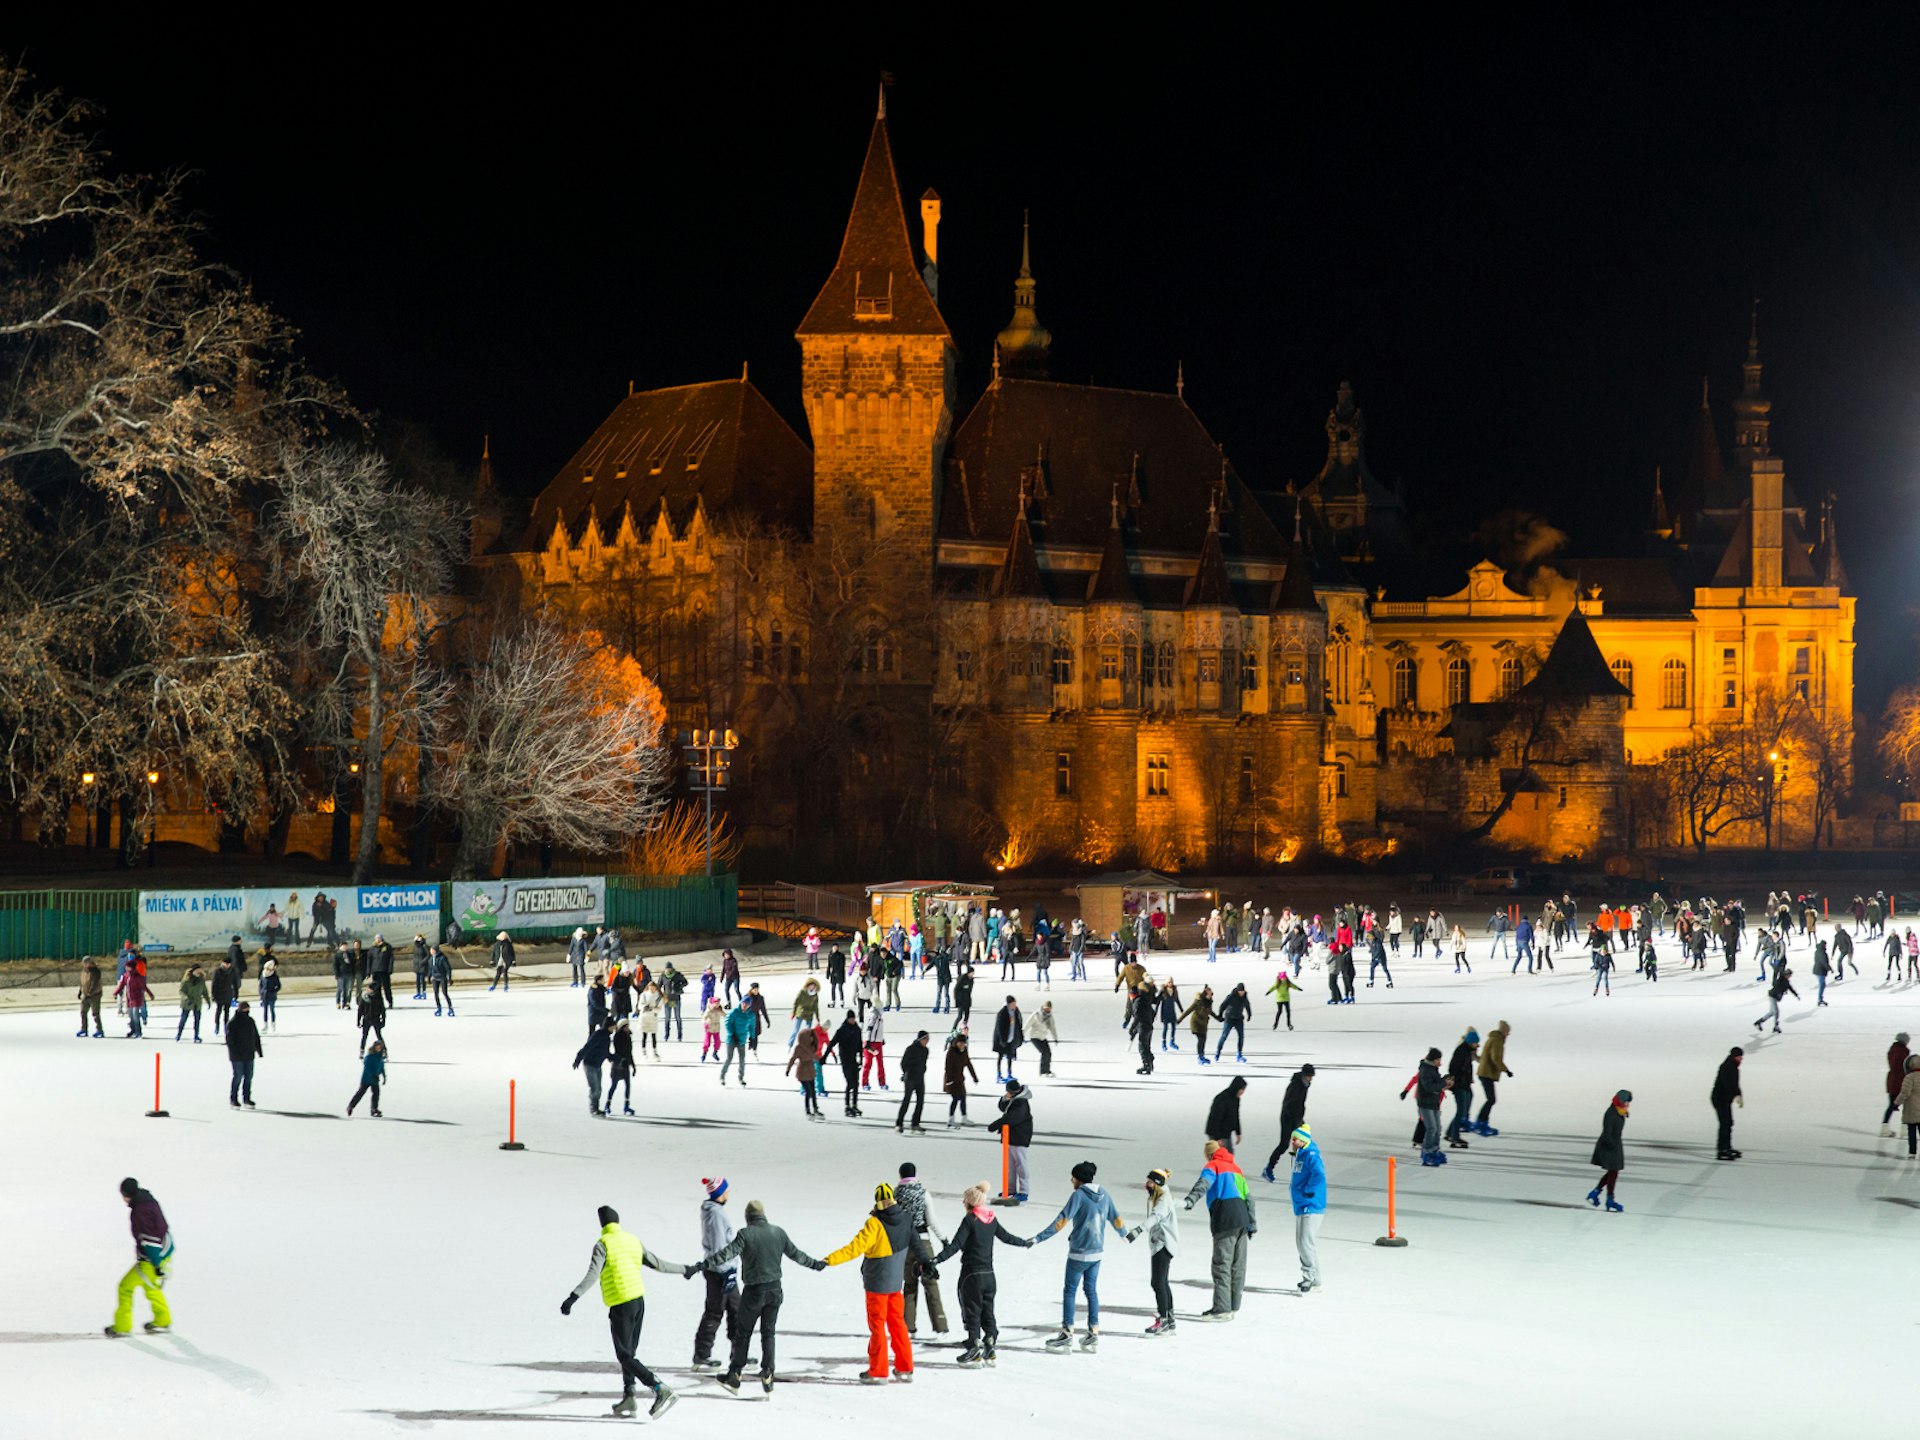 A night shot over a large ice rink with many people skating around. In the foreground a group of seven people hold hands and form a chain. In the background the castle is lit up.